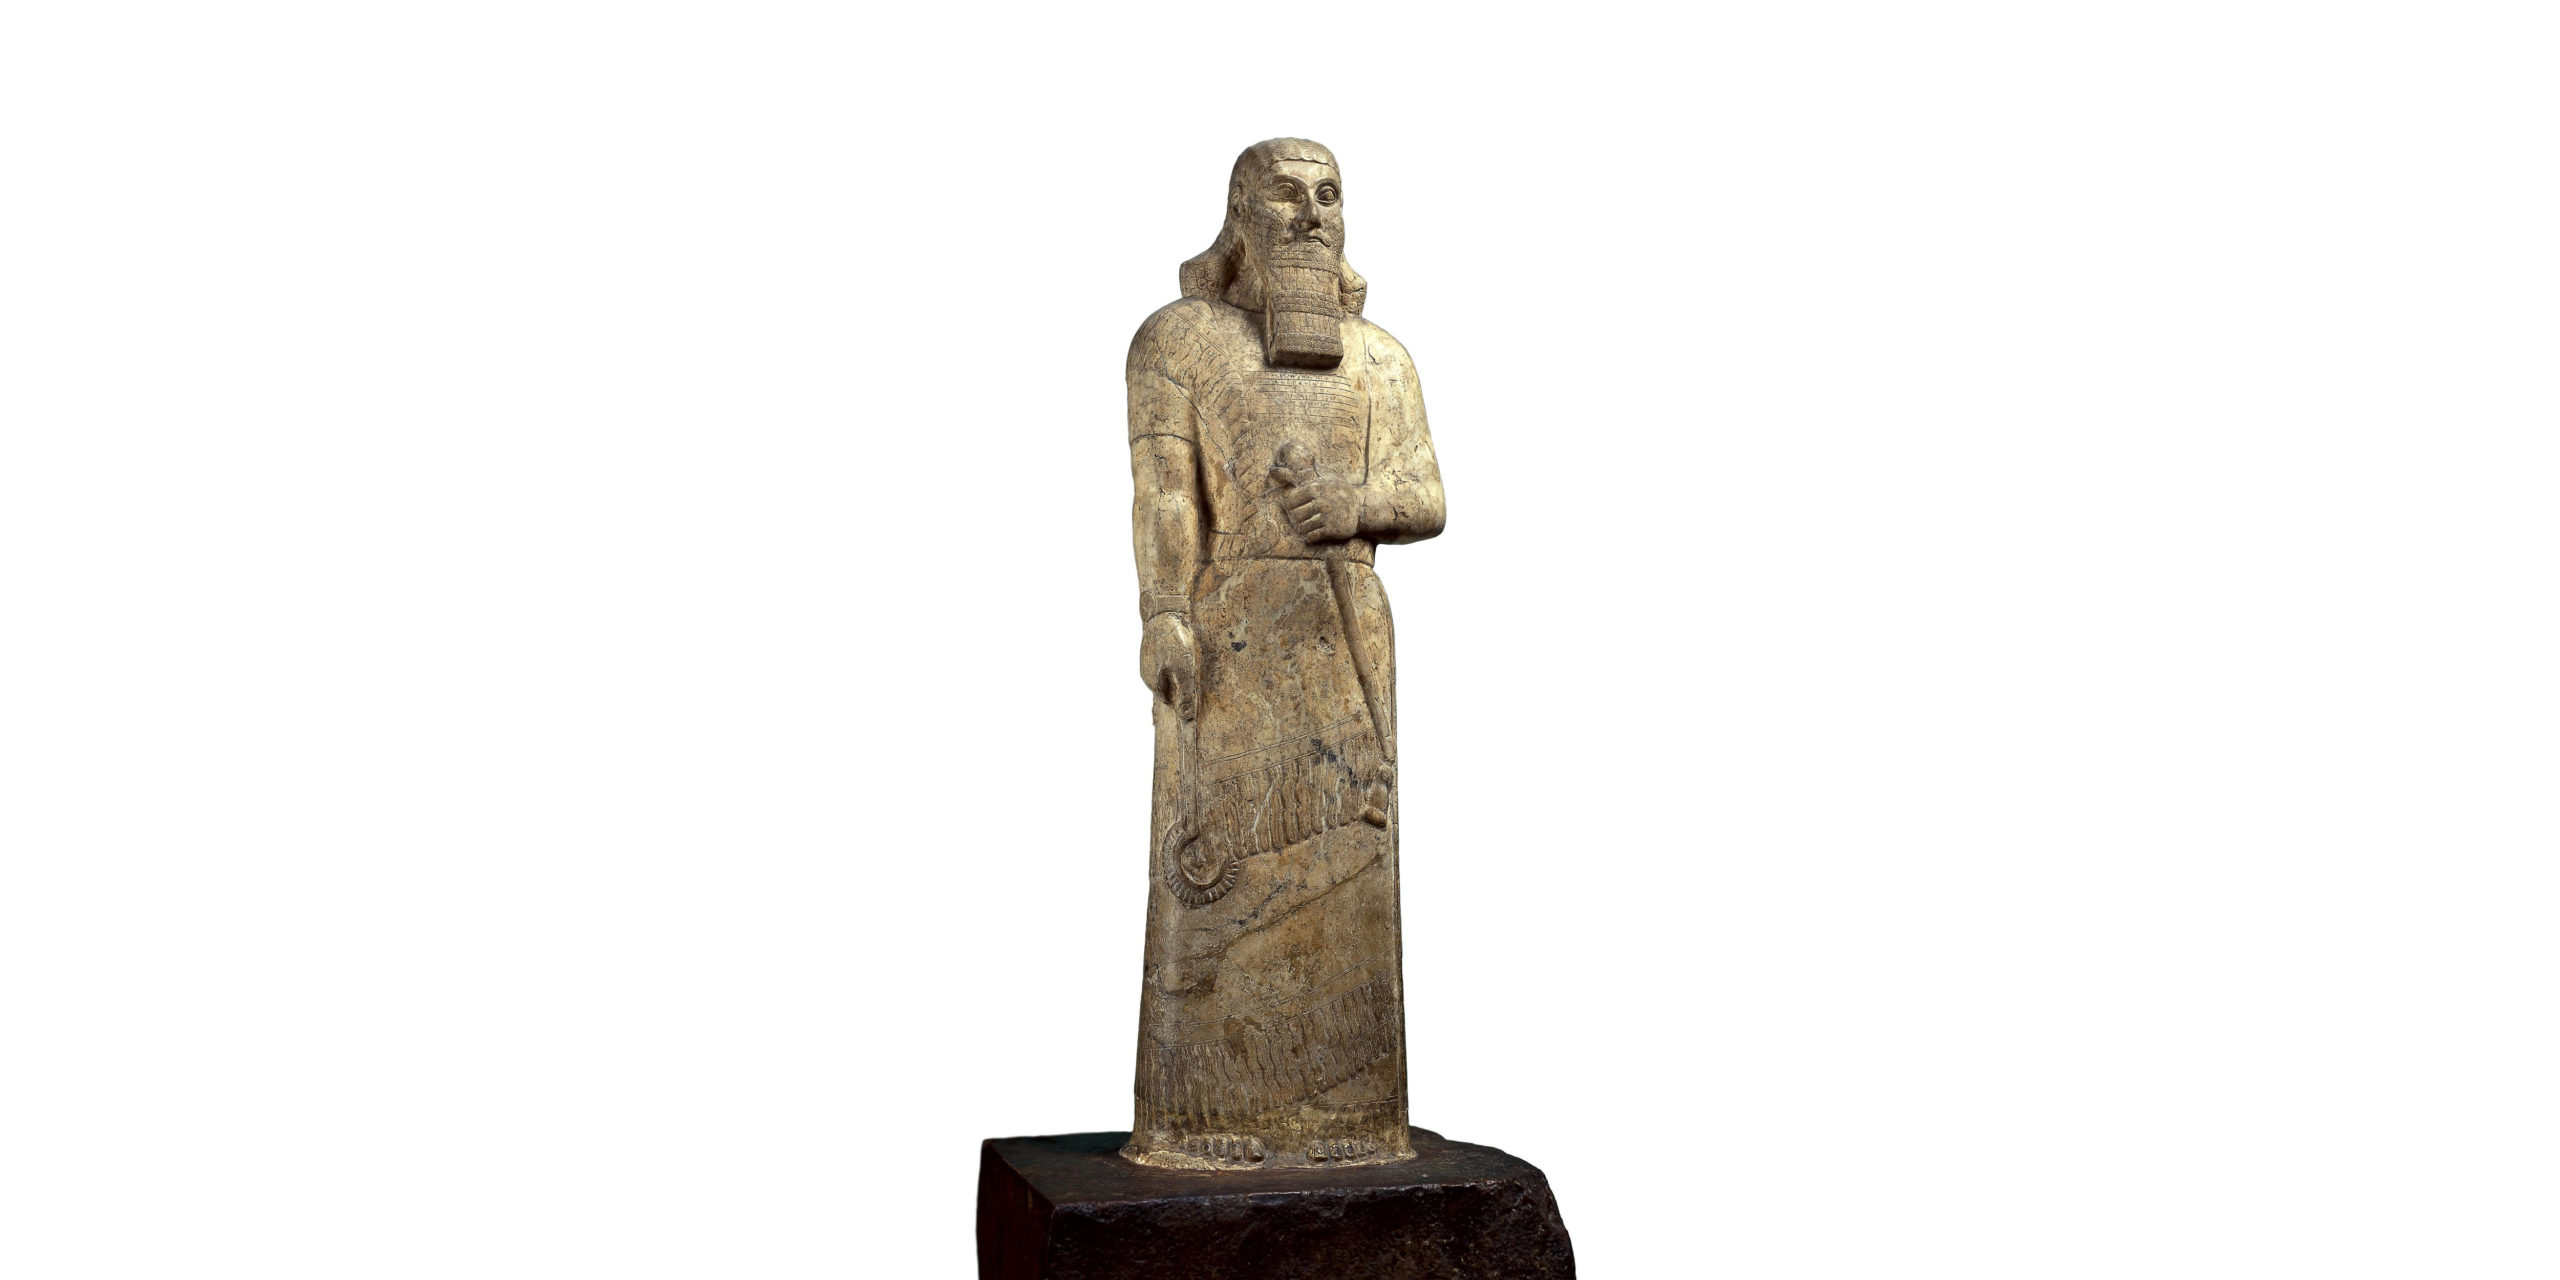 Statue of Ashurnasirpal II, Neo-Assyrian, 883–859 B.C.E., from Nimrud (ancient Kalhu), northern Iraq, magnesite, 113 x 32 x 15 cm (© The Trustees of the British Museum)  This rare example of an Assyrian statue in the round was placed in the Temple of Ishtar Sharrat-niphi to remind the goddess Ishtar of the king's piety. Ashurnasirpal holds a sickle in his right hand, of a kind which gods are sometimes depicted using to fight monsters. The mace in his left hand shows his authority as vice-regent of the supreme god Ashur. The carved cuneiform inscription across his chest proclaims the king's titles and genealogy, and mentions his expedition westward to the Mediterranean Sea.